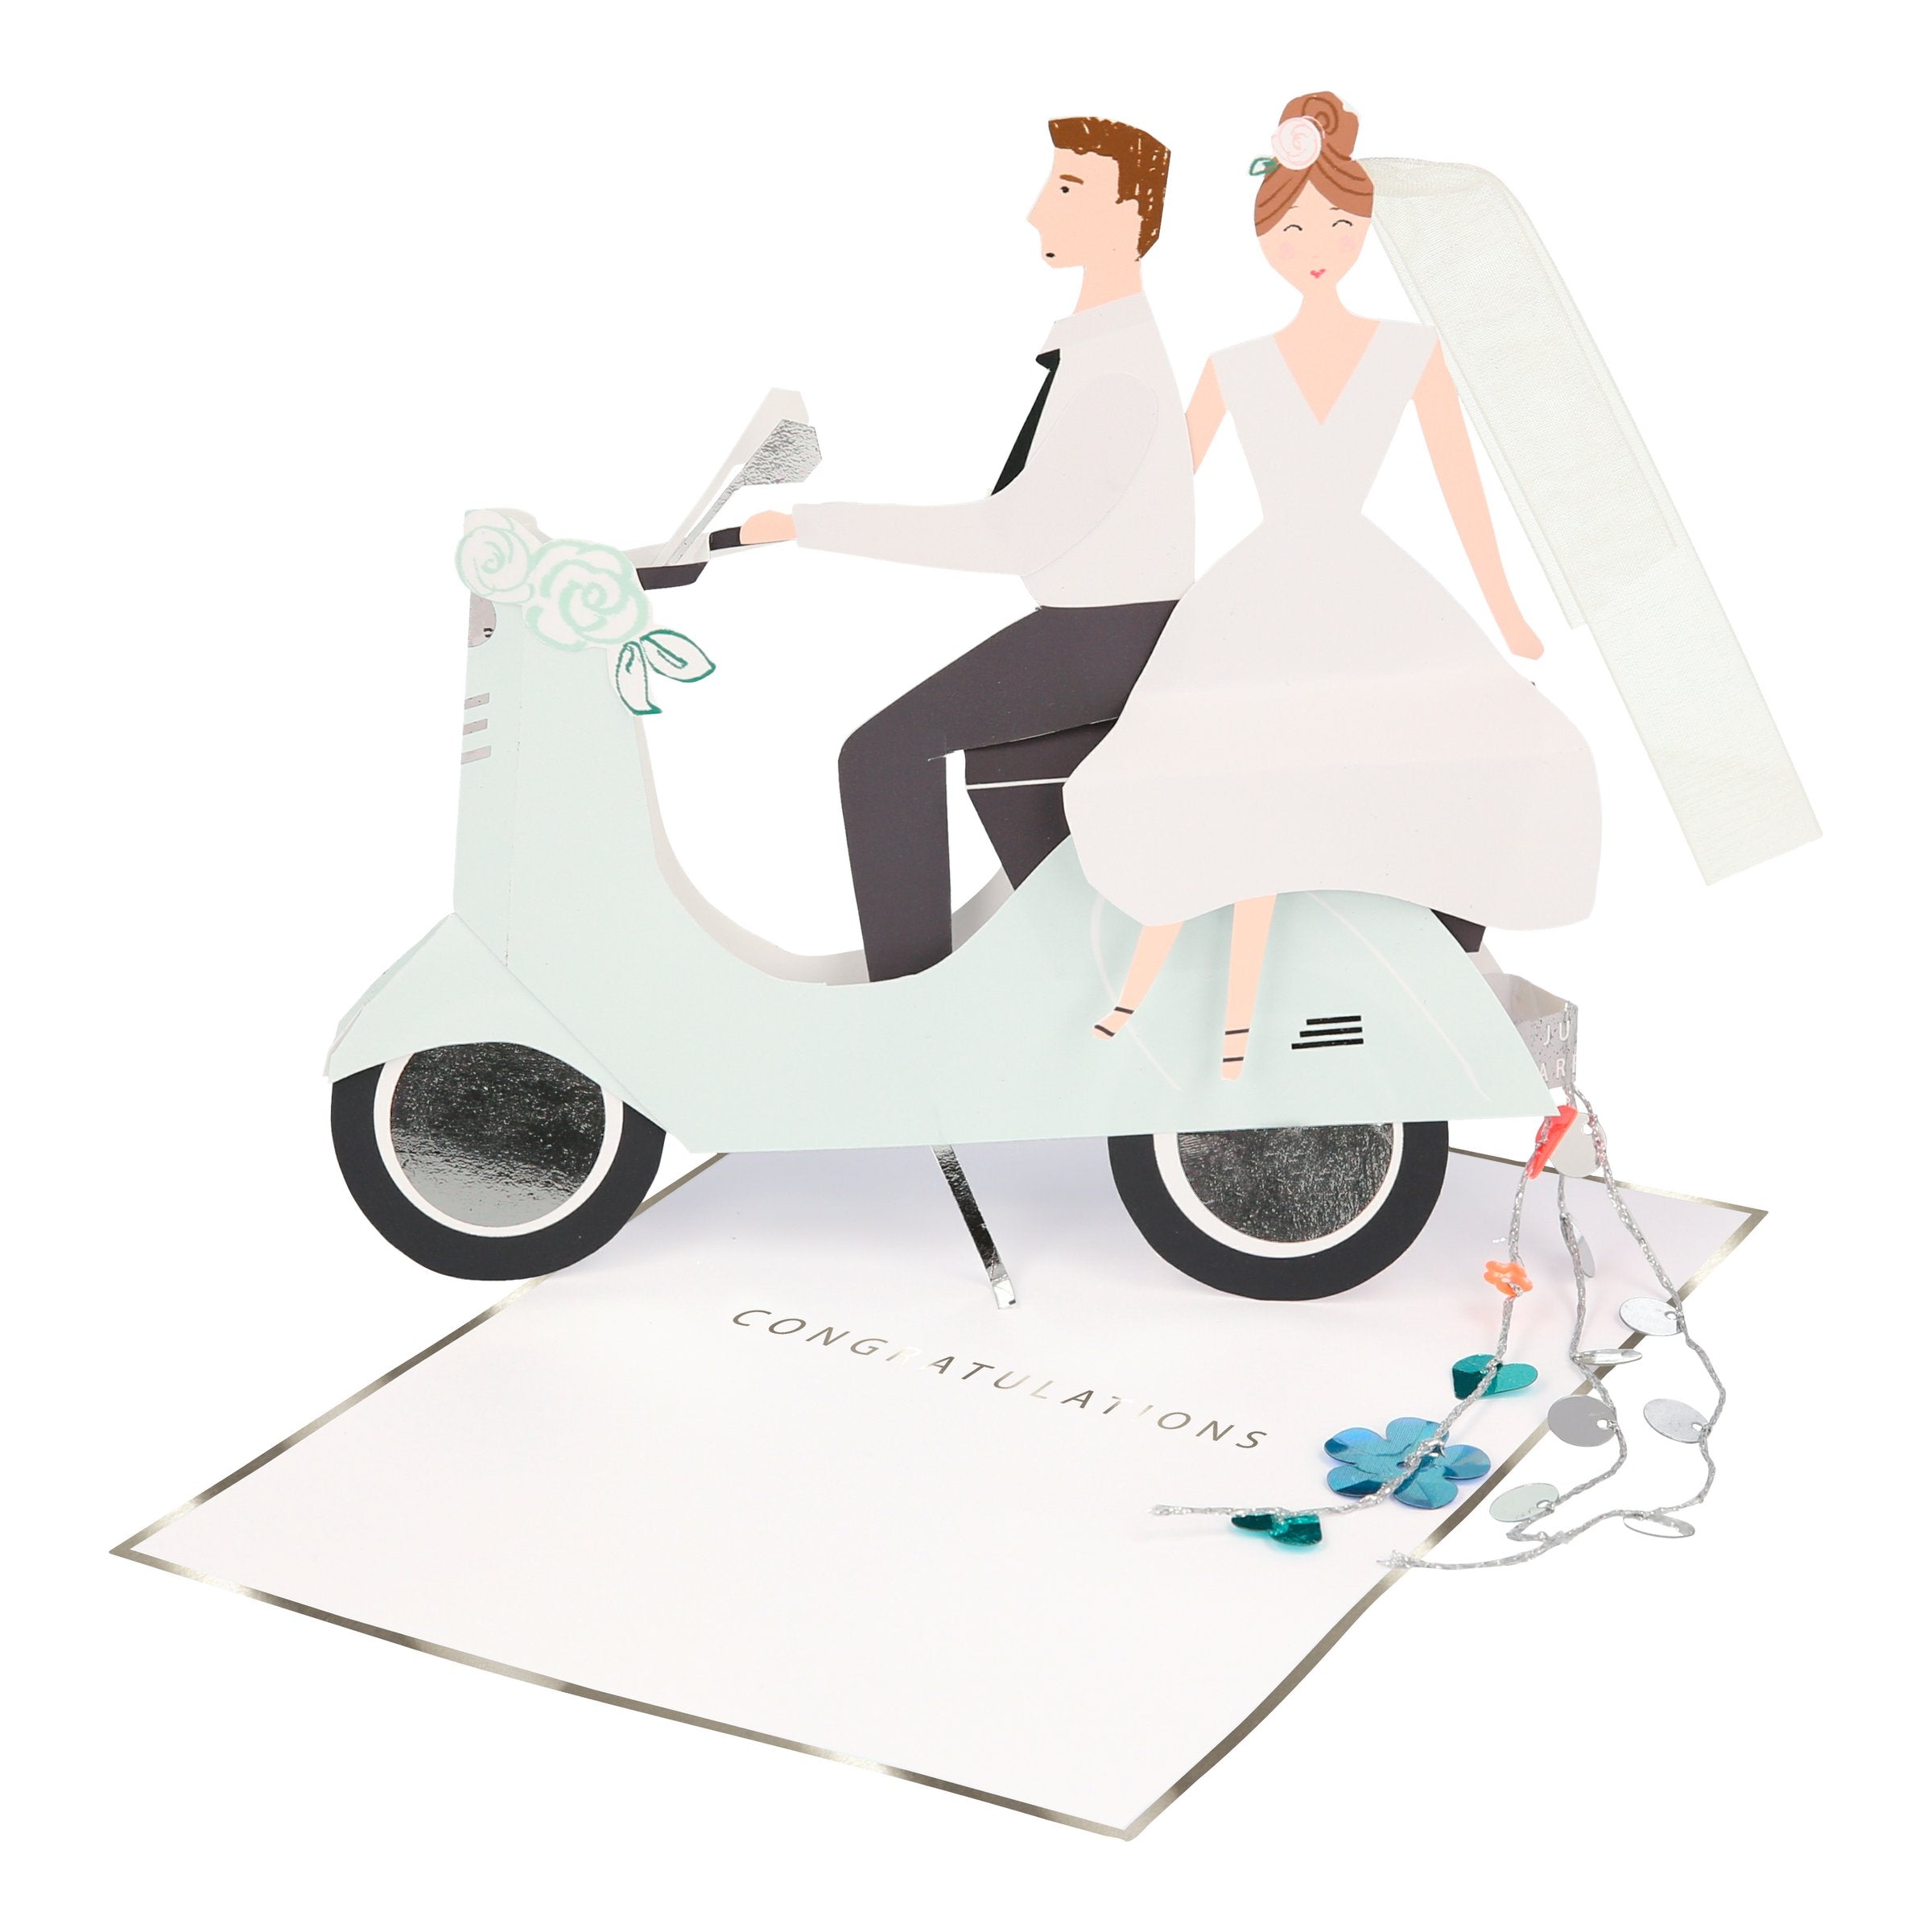 Give your best wishes to the happy couple with our 3D card with a congrulatory wedding card message.